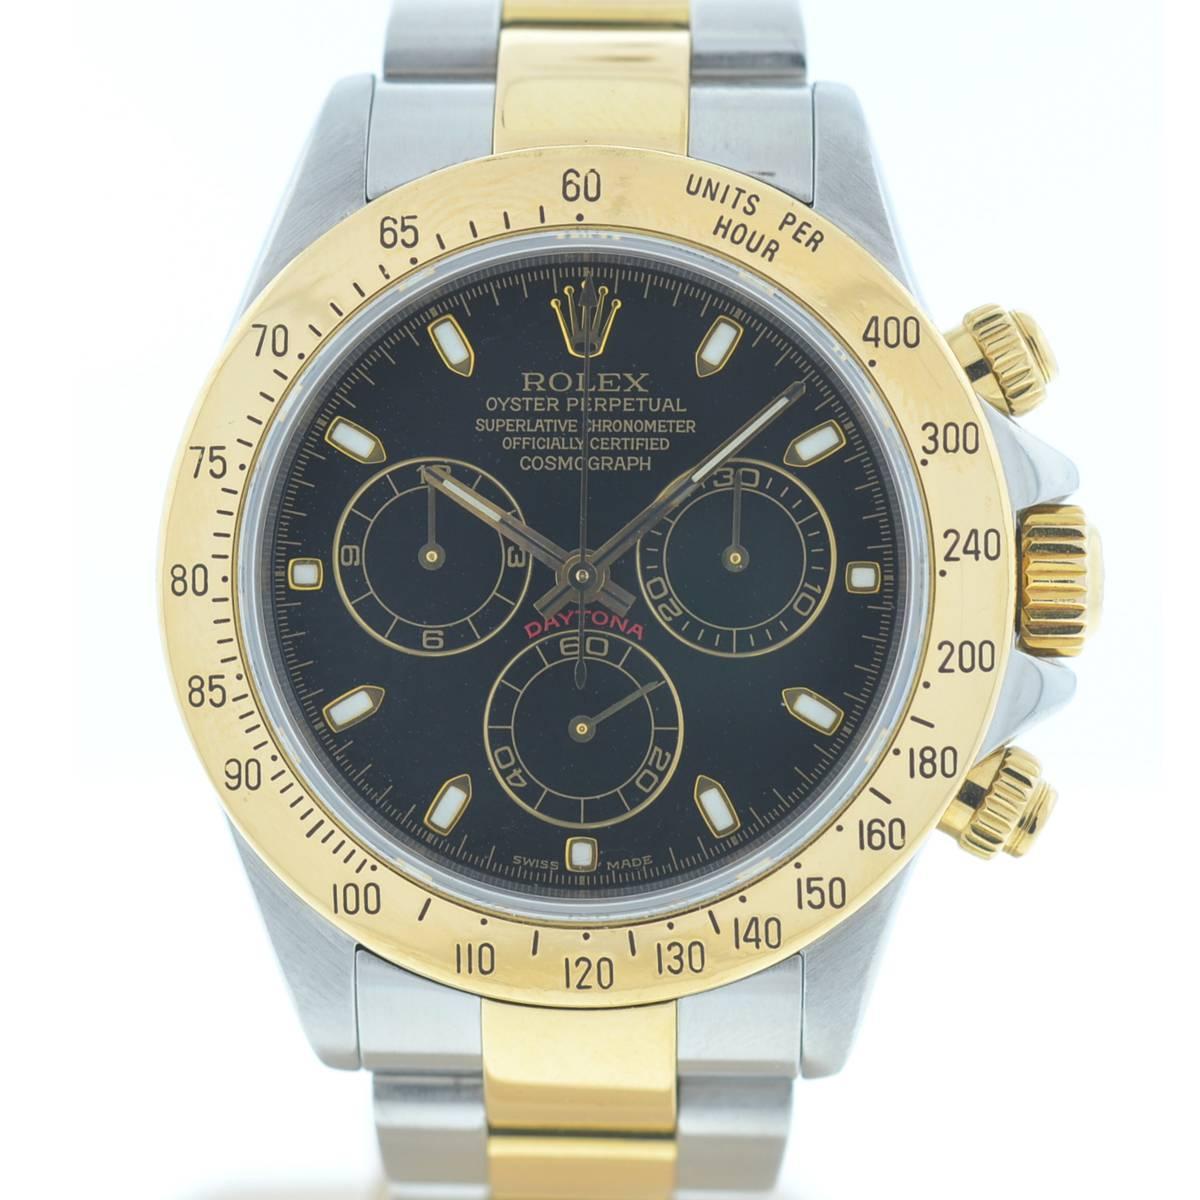 Company - Rolex
Model - Daytona
Case Metal - Stainless Steel
Case Measurement - 40mm
Bracelet - Stainless Steel & 18k Yellow Gold - Fits a 7